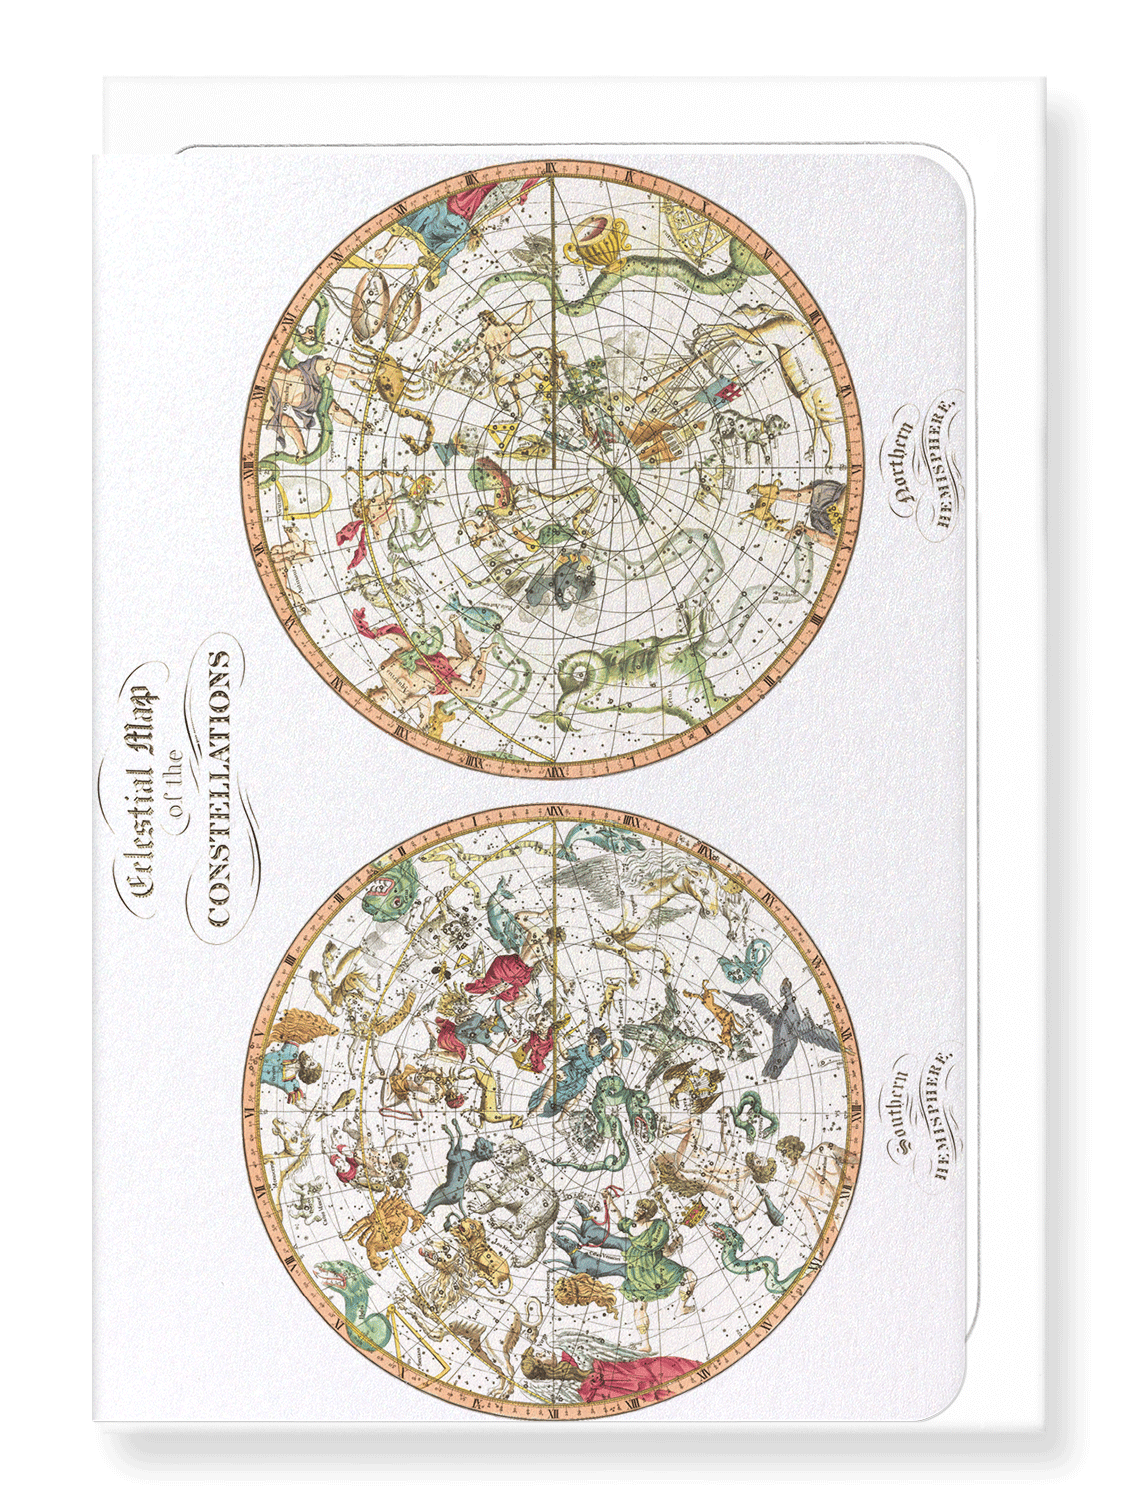 Ezen Designs - Celestial map (1820) - Greeting Card - Front